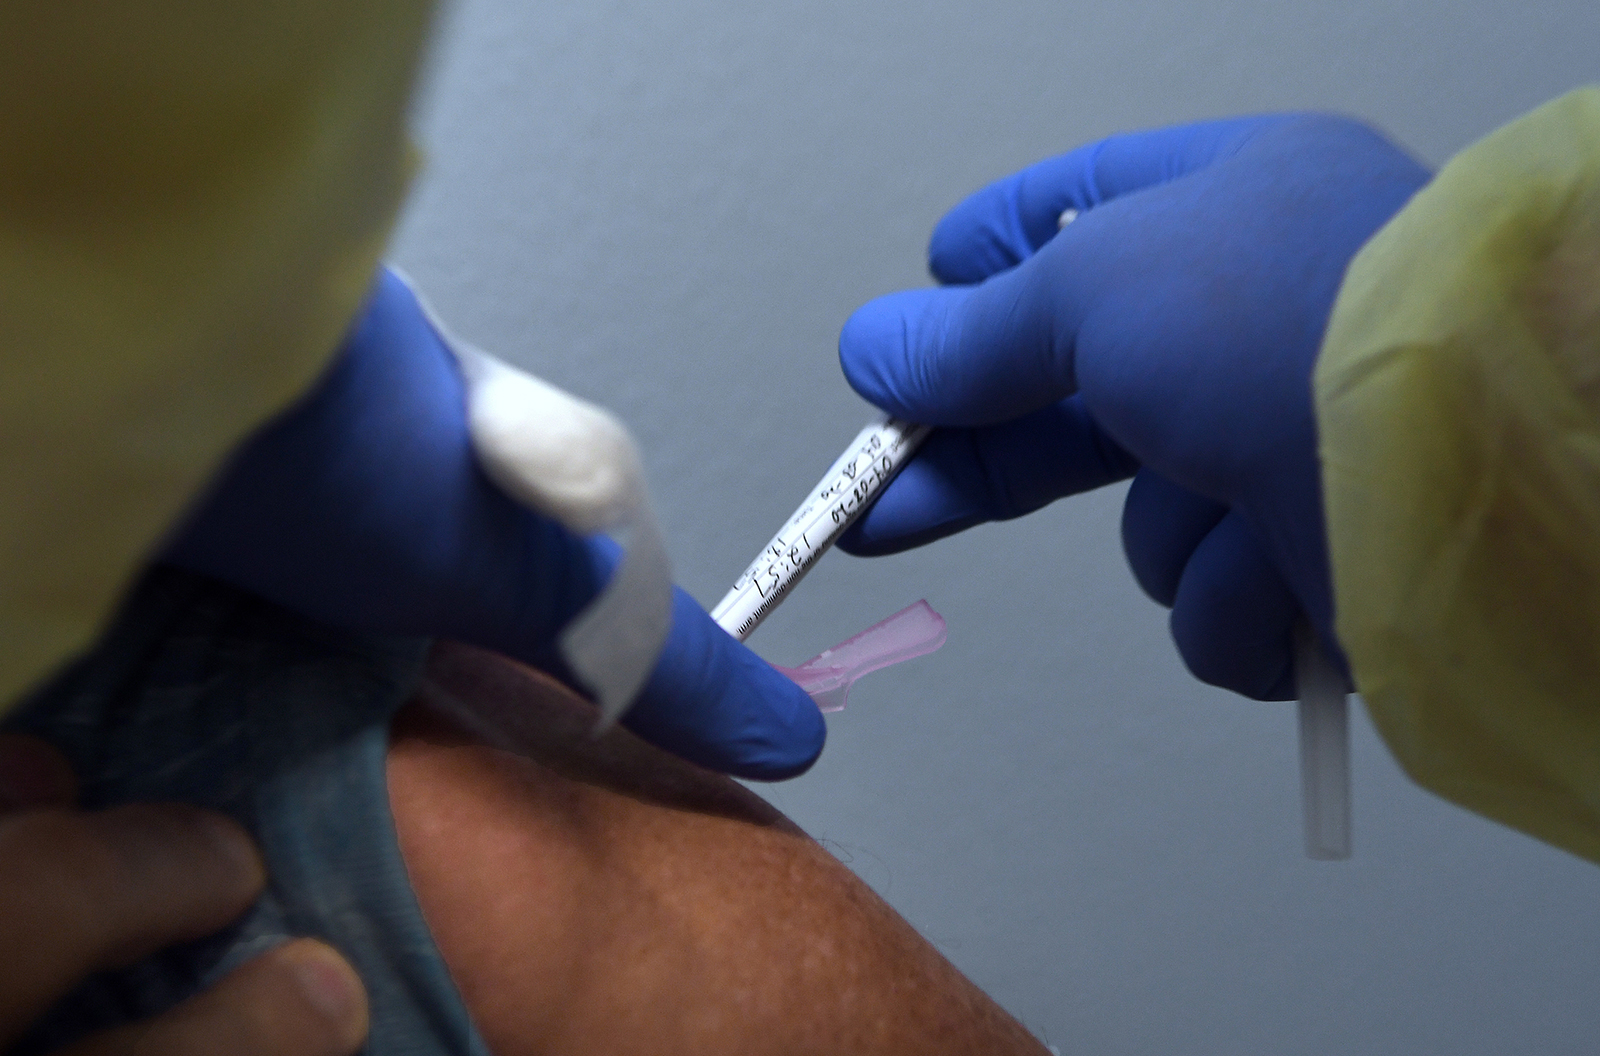 Tony Potts, a 69-year-old retiree living in Ormond Beach, receives his first injection as a participant in a Phase 3 Covid-19 vaccine clinical trial sponsored by Moderna at Accel Research Sites on August 4, 2020 in DeLand, Florida.